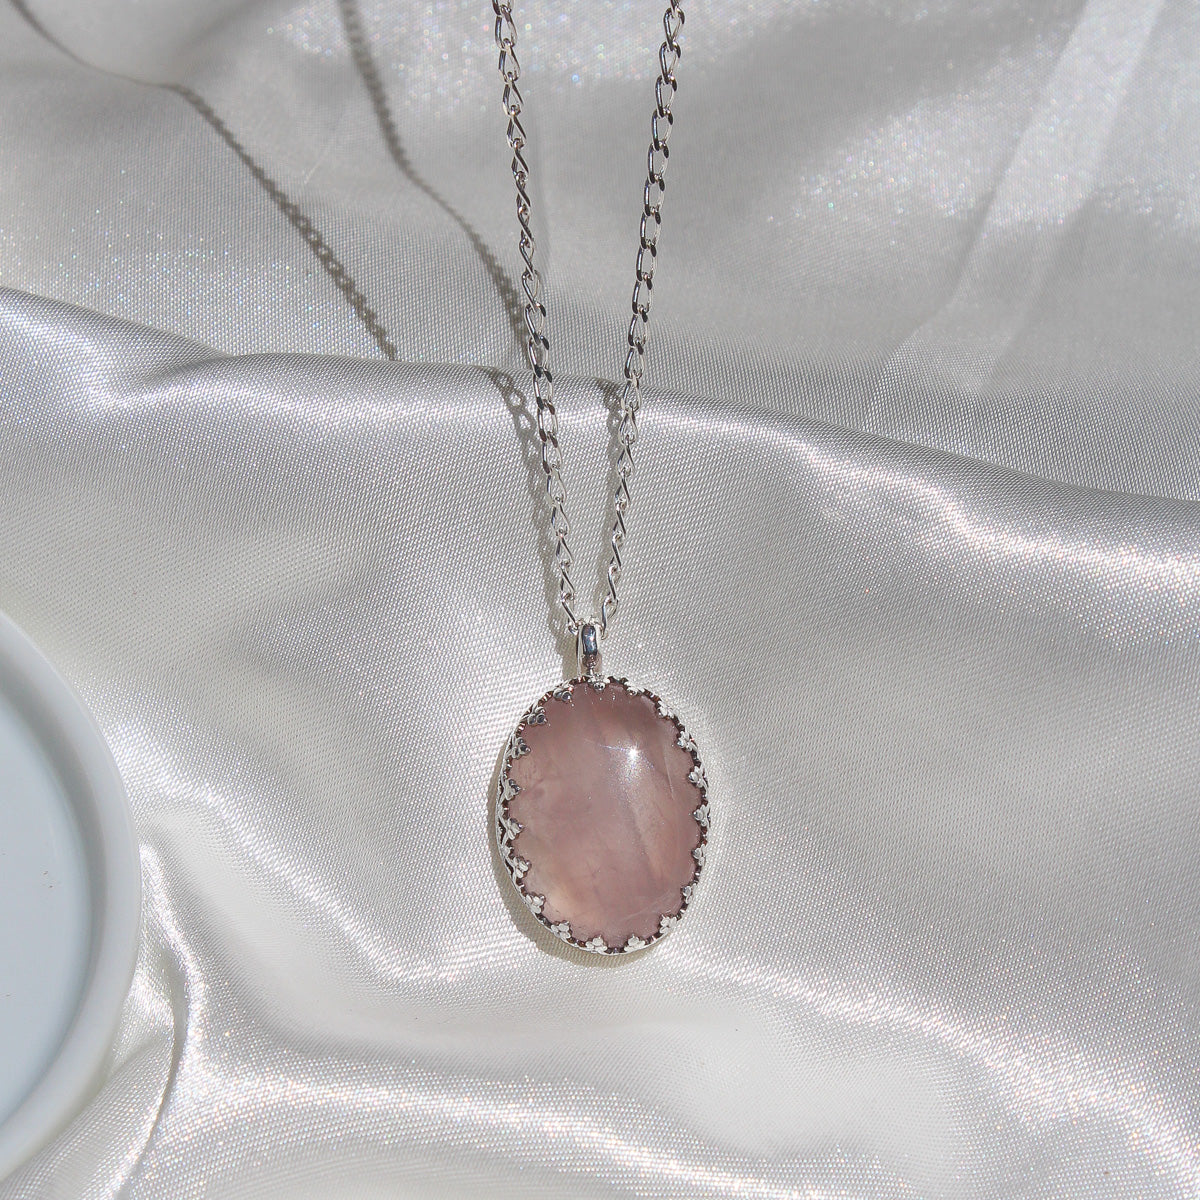 handmade 925 sterling silver rose quartz pendant necklace adjustable chain with heart shaped cut out